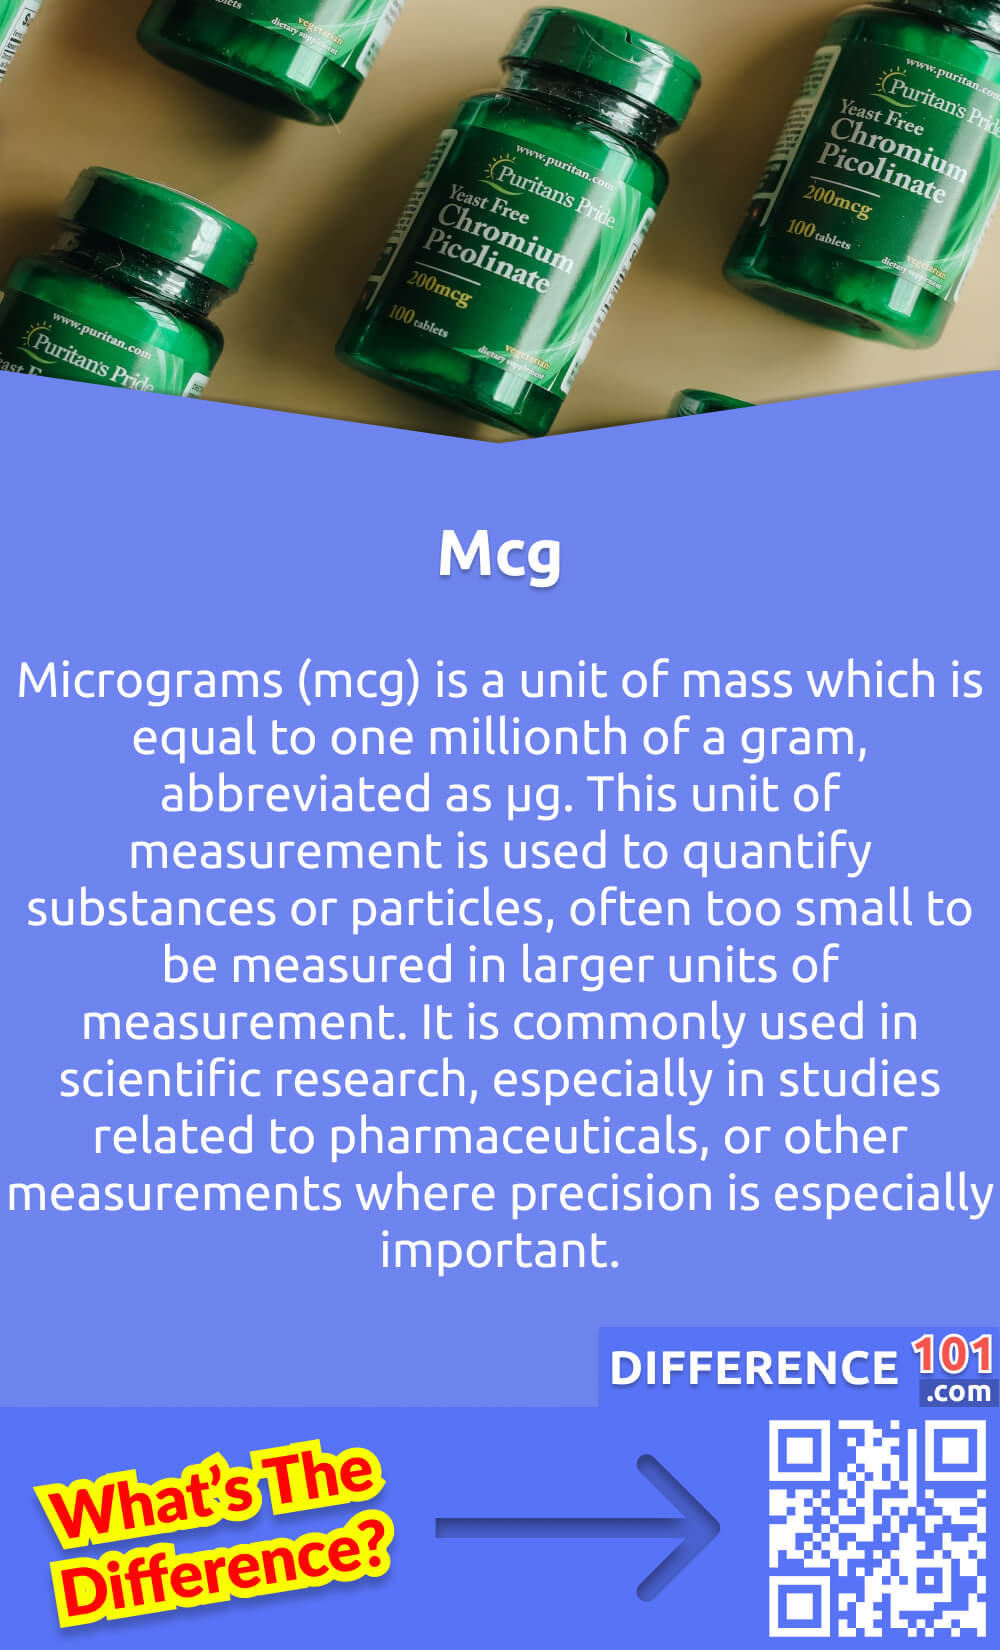 What Is Mcg? Micrograms (mcg) is a unit of mass which is equal to one millionth of a gram, abbreviated as μg. This unit of measurement is used to quantify substances or particles, often too small to be measured in larger units of measurement. It is commonly used in scientific research, especially in studies related to pharmaceuticals, or other measurements where precision is especially important. In some cases, it might be necessary to measure extremely tiny amounts to ensure that the data is accurate and representative of the subject at hand. Measuring in mcg allows researchers to control and understand the relative amounts of various substances, without having to use larger measurements that would be more difficult to manage or reflect inaccurately.